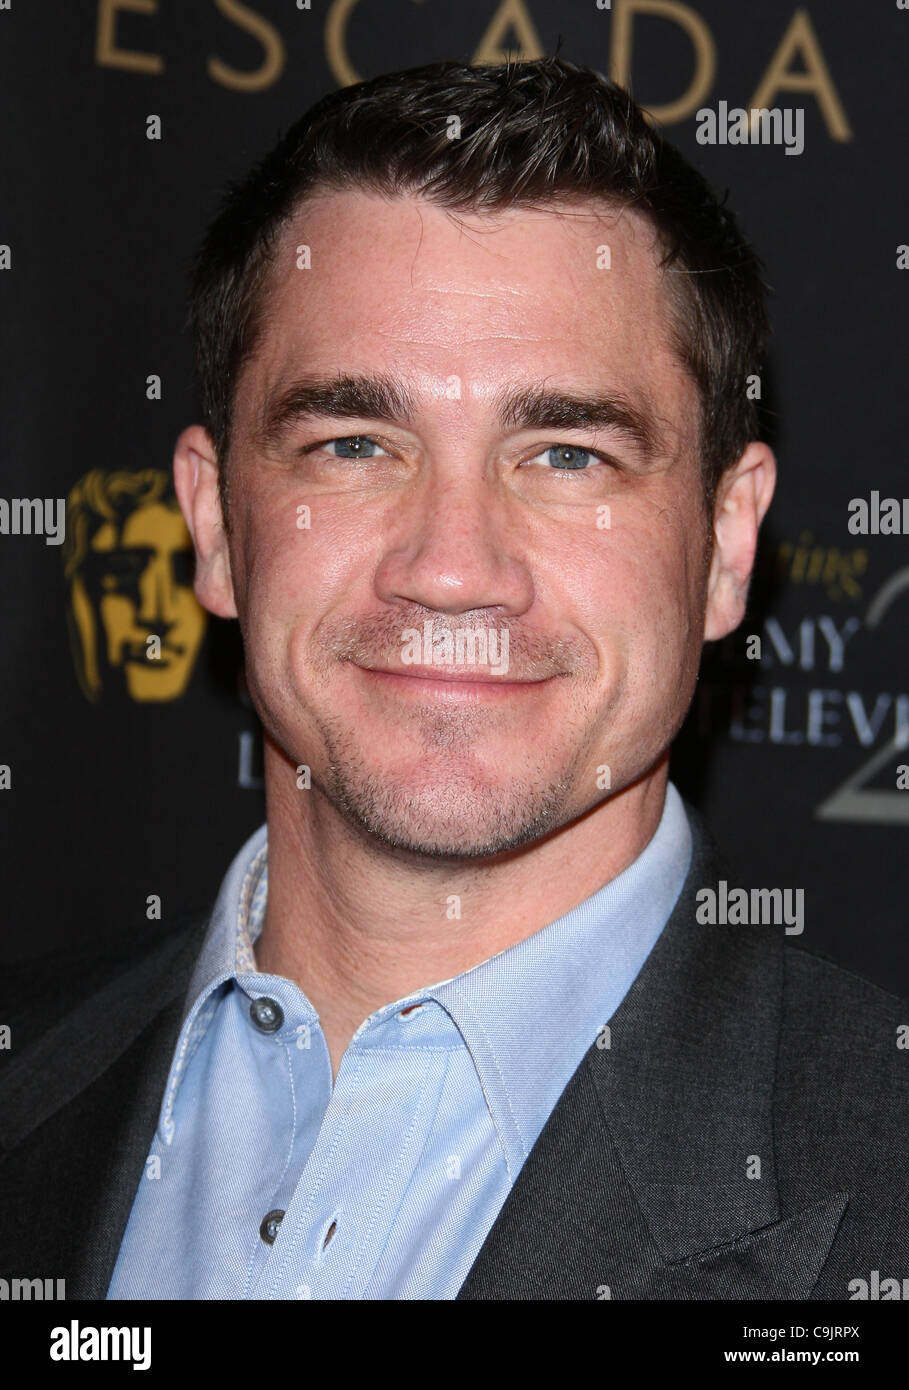 TATE TAYLOR BAFTA LOS ANGELES 18TH ANNUAL AWARDS STAGIONE TEA PARTY BEVERLY HILLS LOS ANGELES CALIFORNIA USA 14 Gennaio 2012 Foto Stock